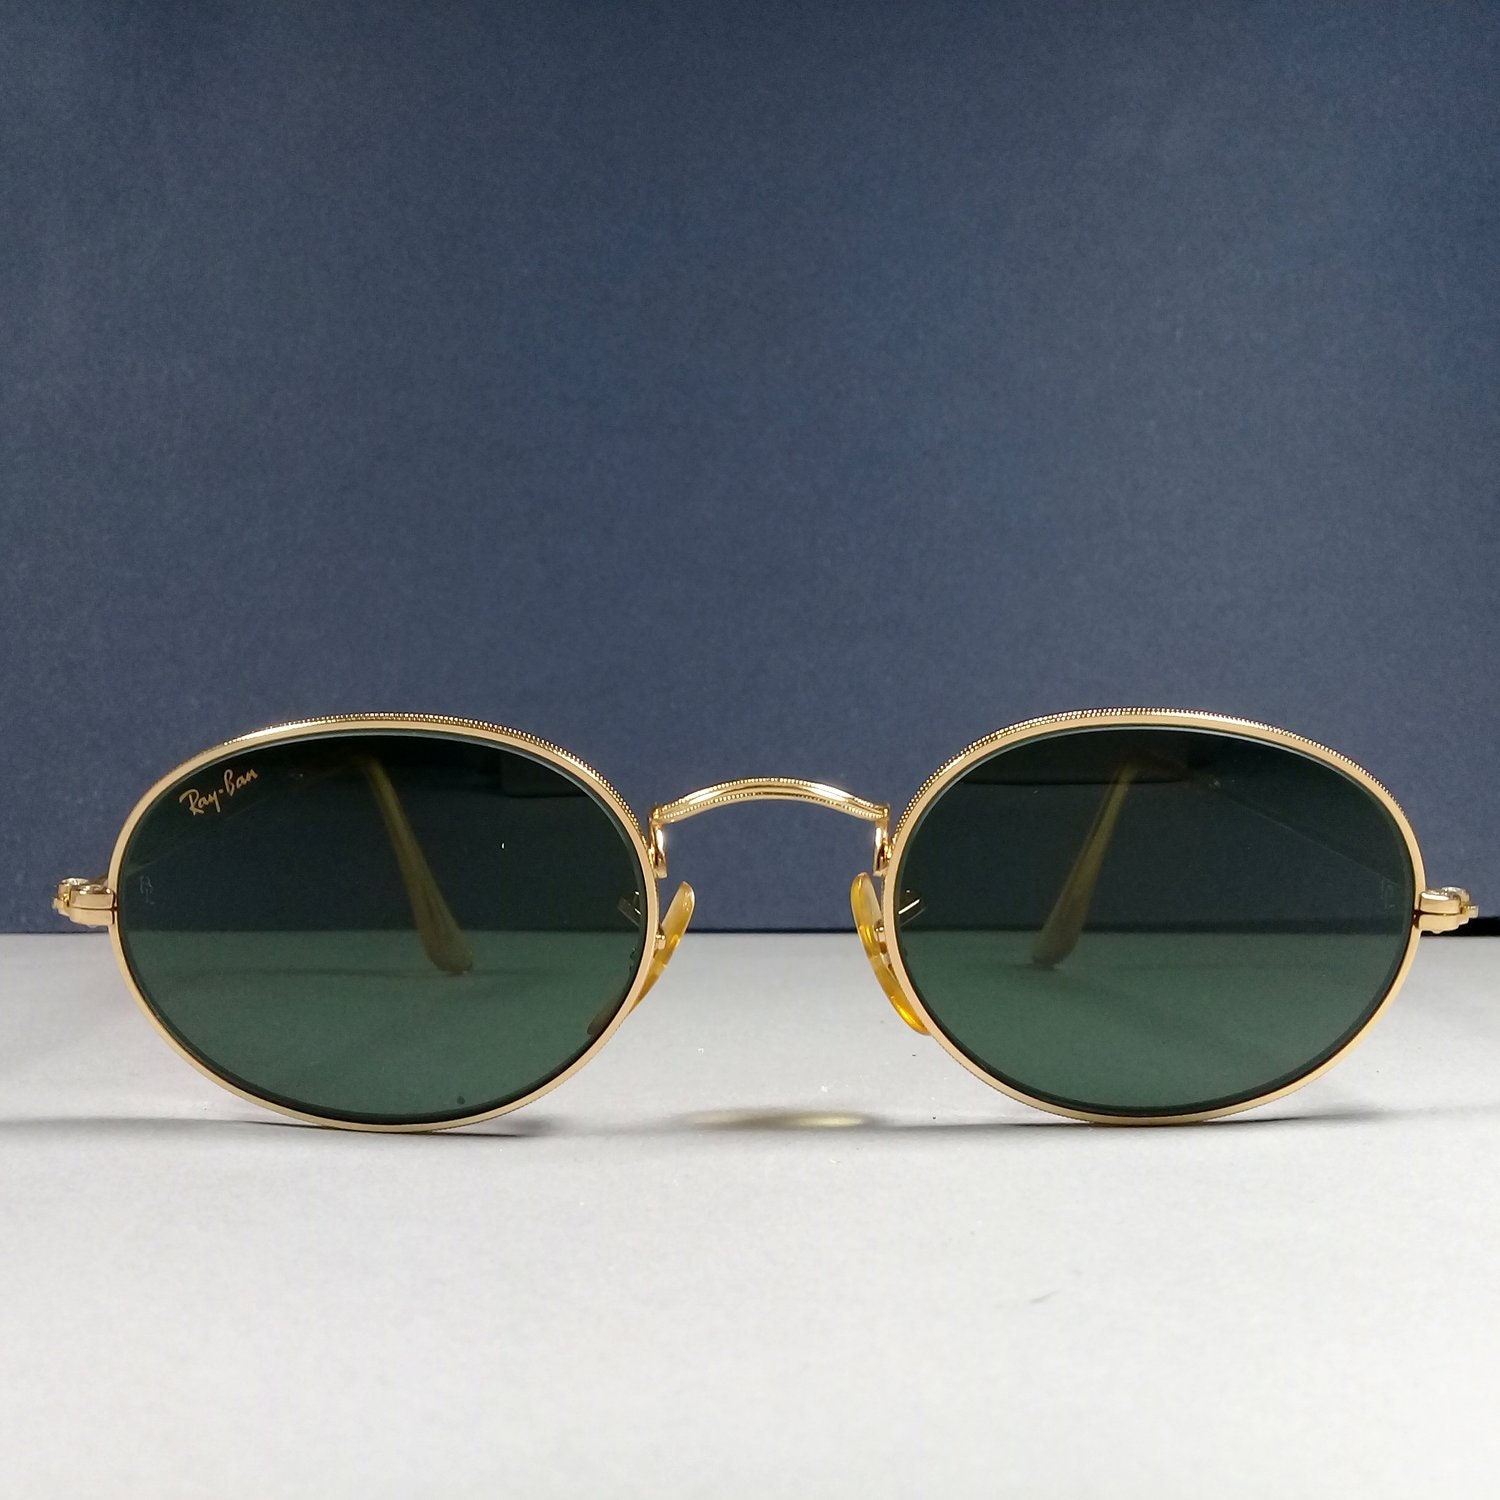 Ray Ban B&L Oval W0976 Gold/Green Vintage Bausch Lomb - Etsy 日本